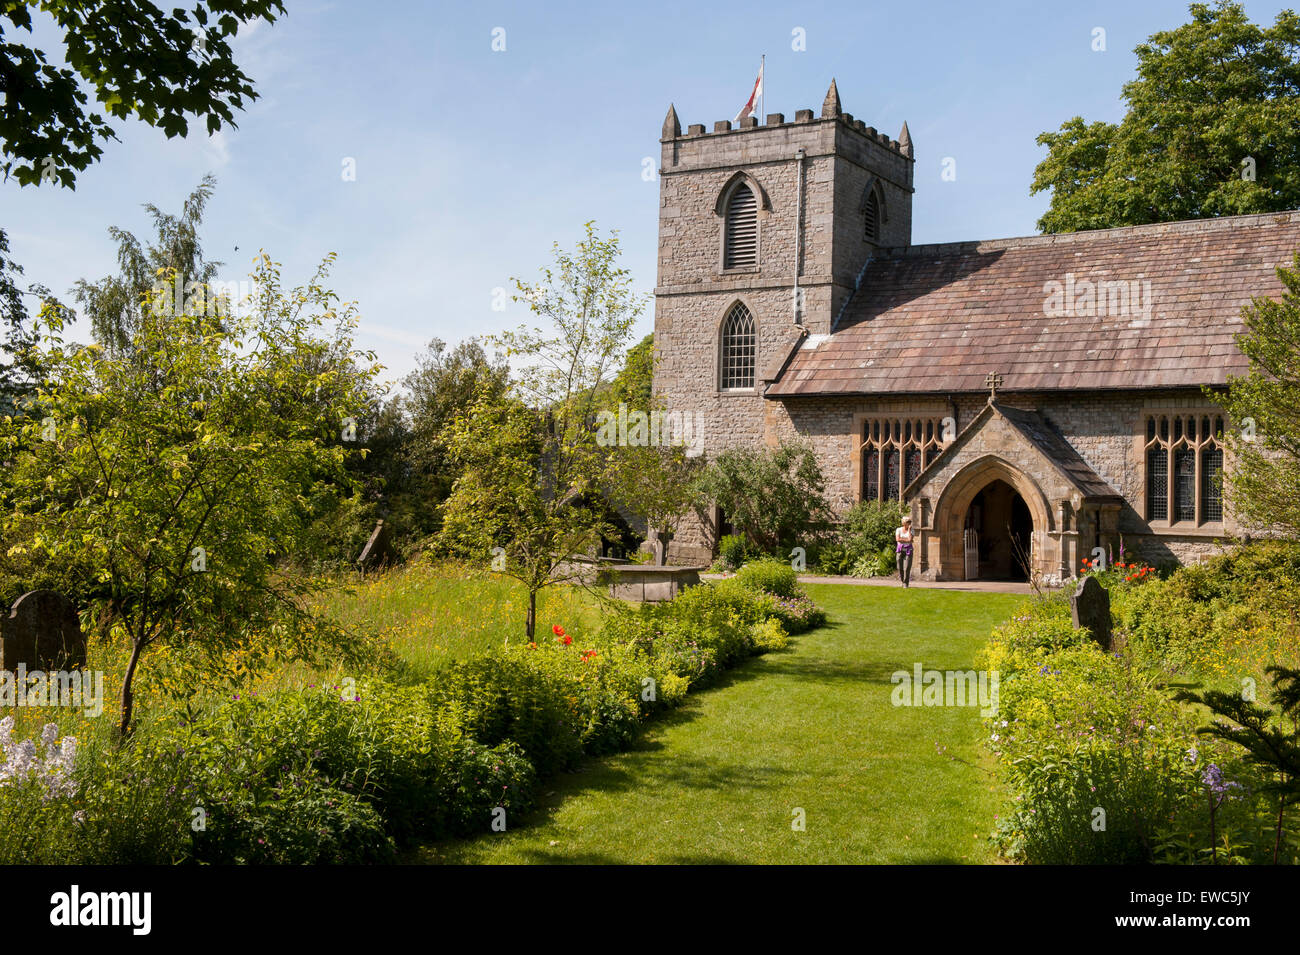 St. Mary's church, Kettlewell, Yorkshire Dales, England, UK. 1 lady standing by porch, beautiful garden with meadow flowers, summer sun & blue sky. Stock Photo